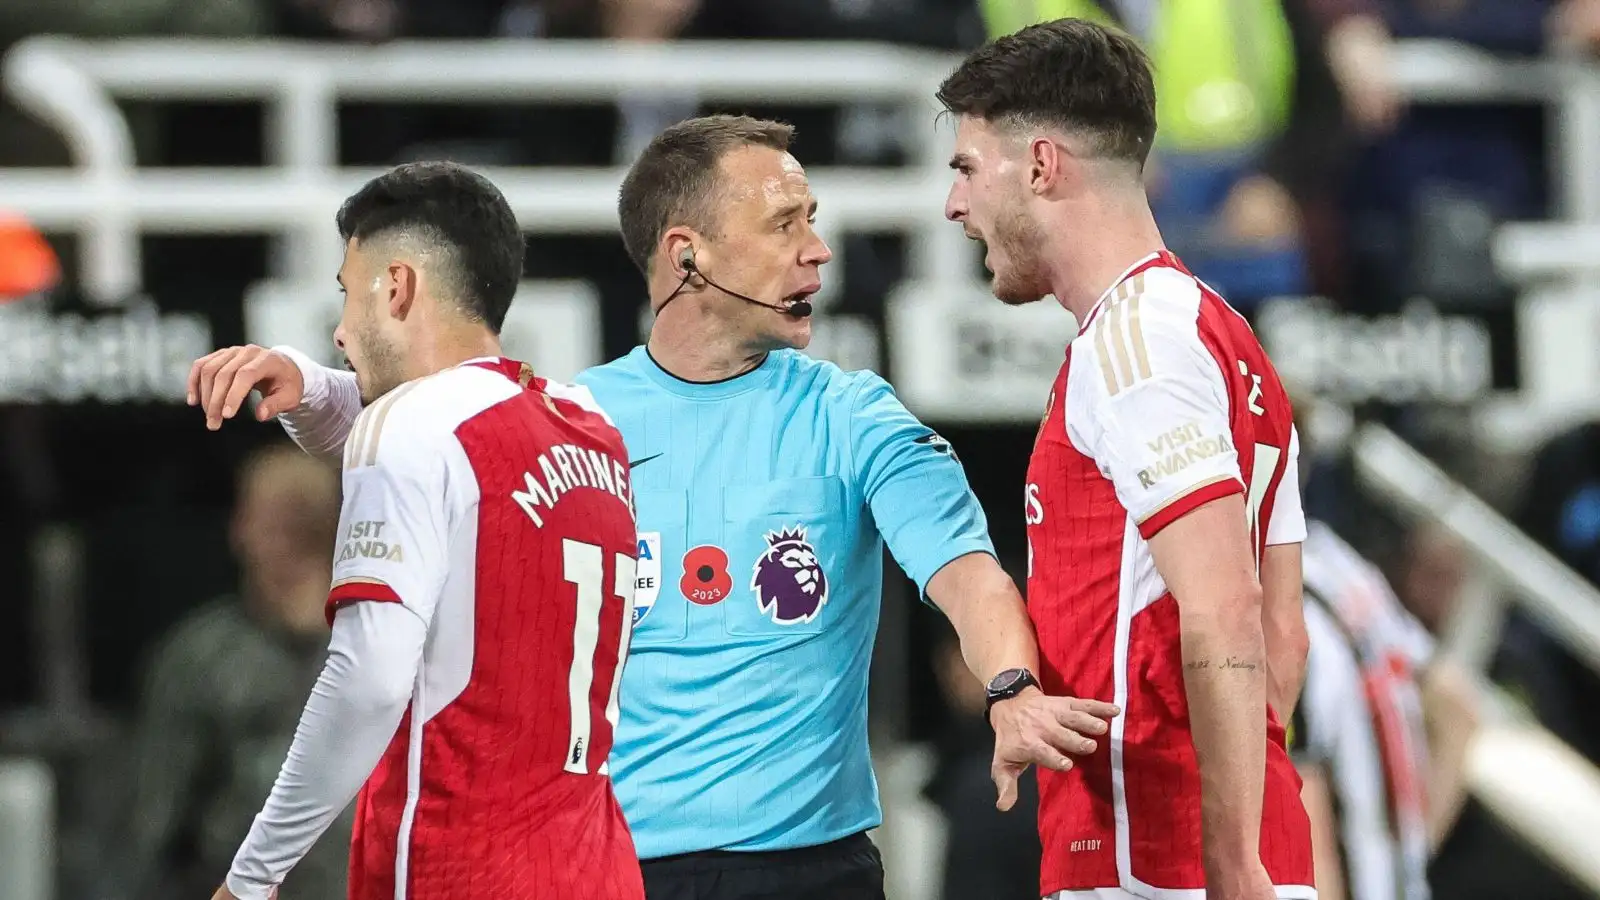 Arsenal gamers shame to the referee